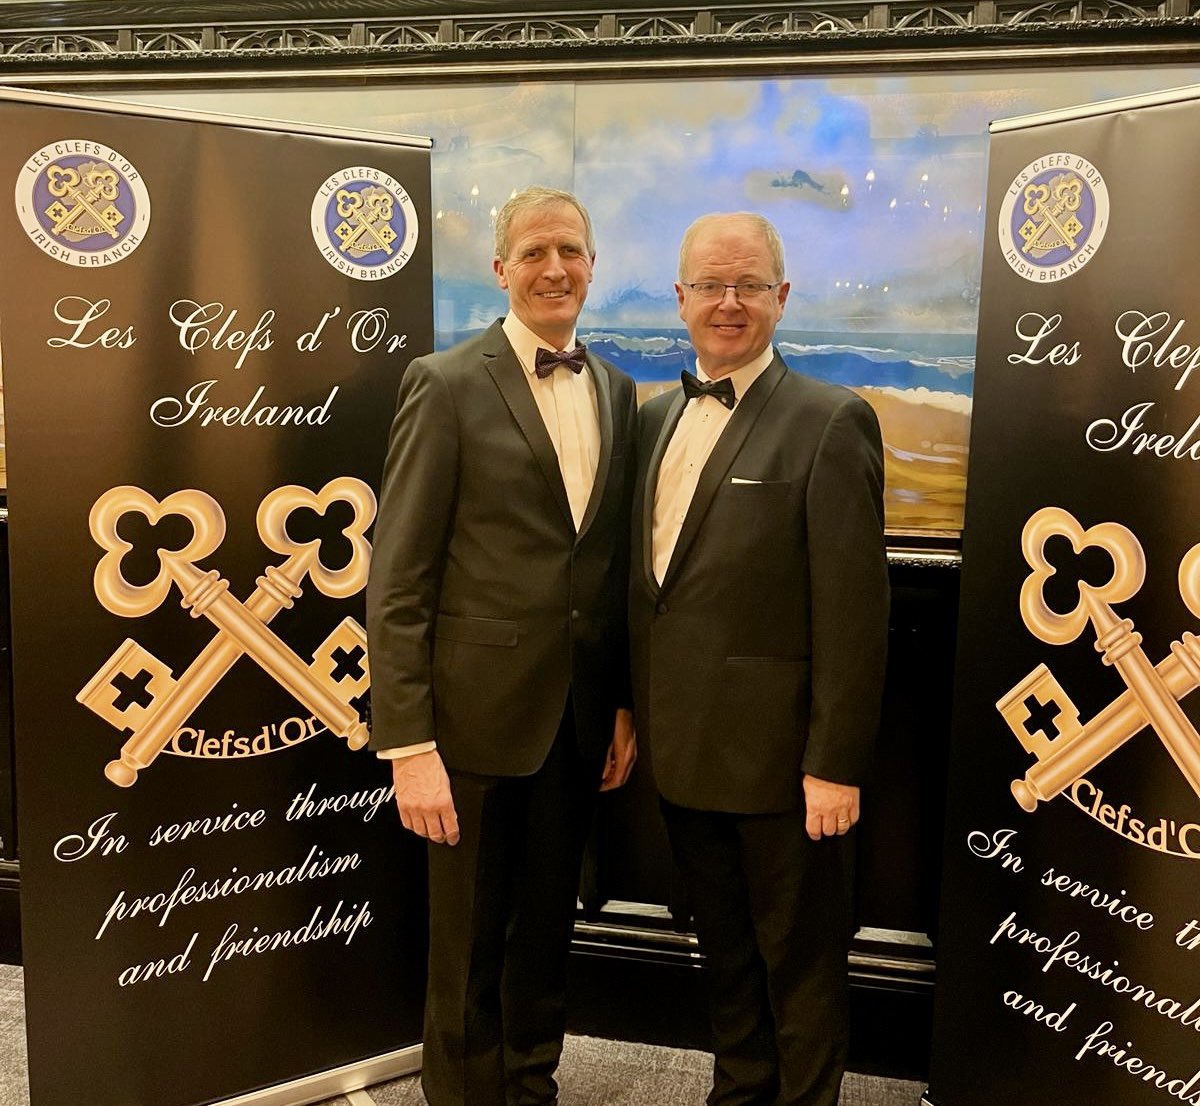 Delighted to welcome a great friend @PhilipGillivan from @Shelbournebar @The_VQ_Cork to the gala dinner of @LesClefsdOrIre @ClontarfCastle . One of our most recent business affiliates #CorkConcierge #InServiceThroughFriendship